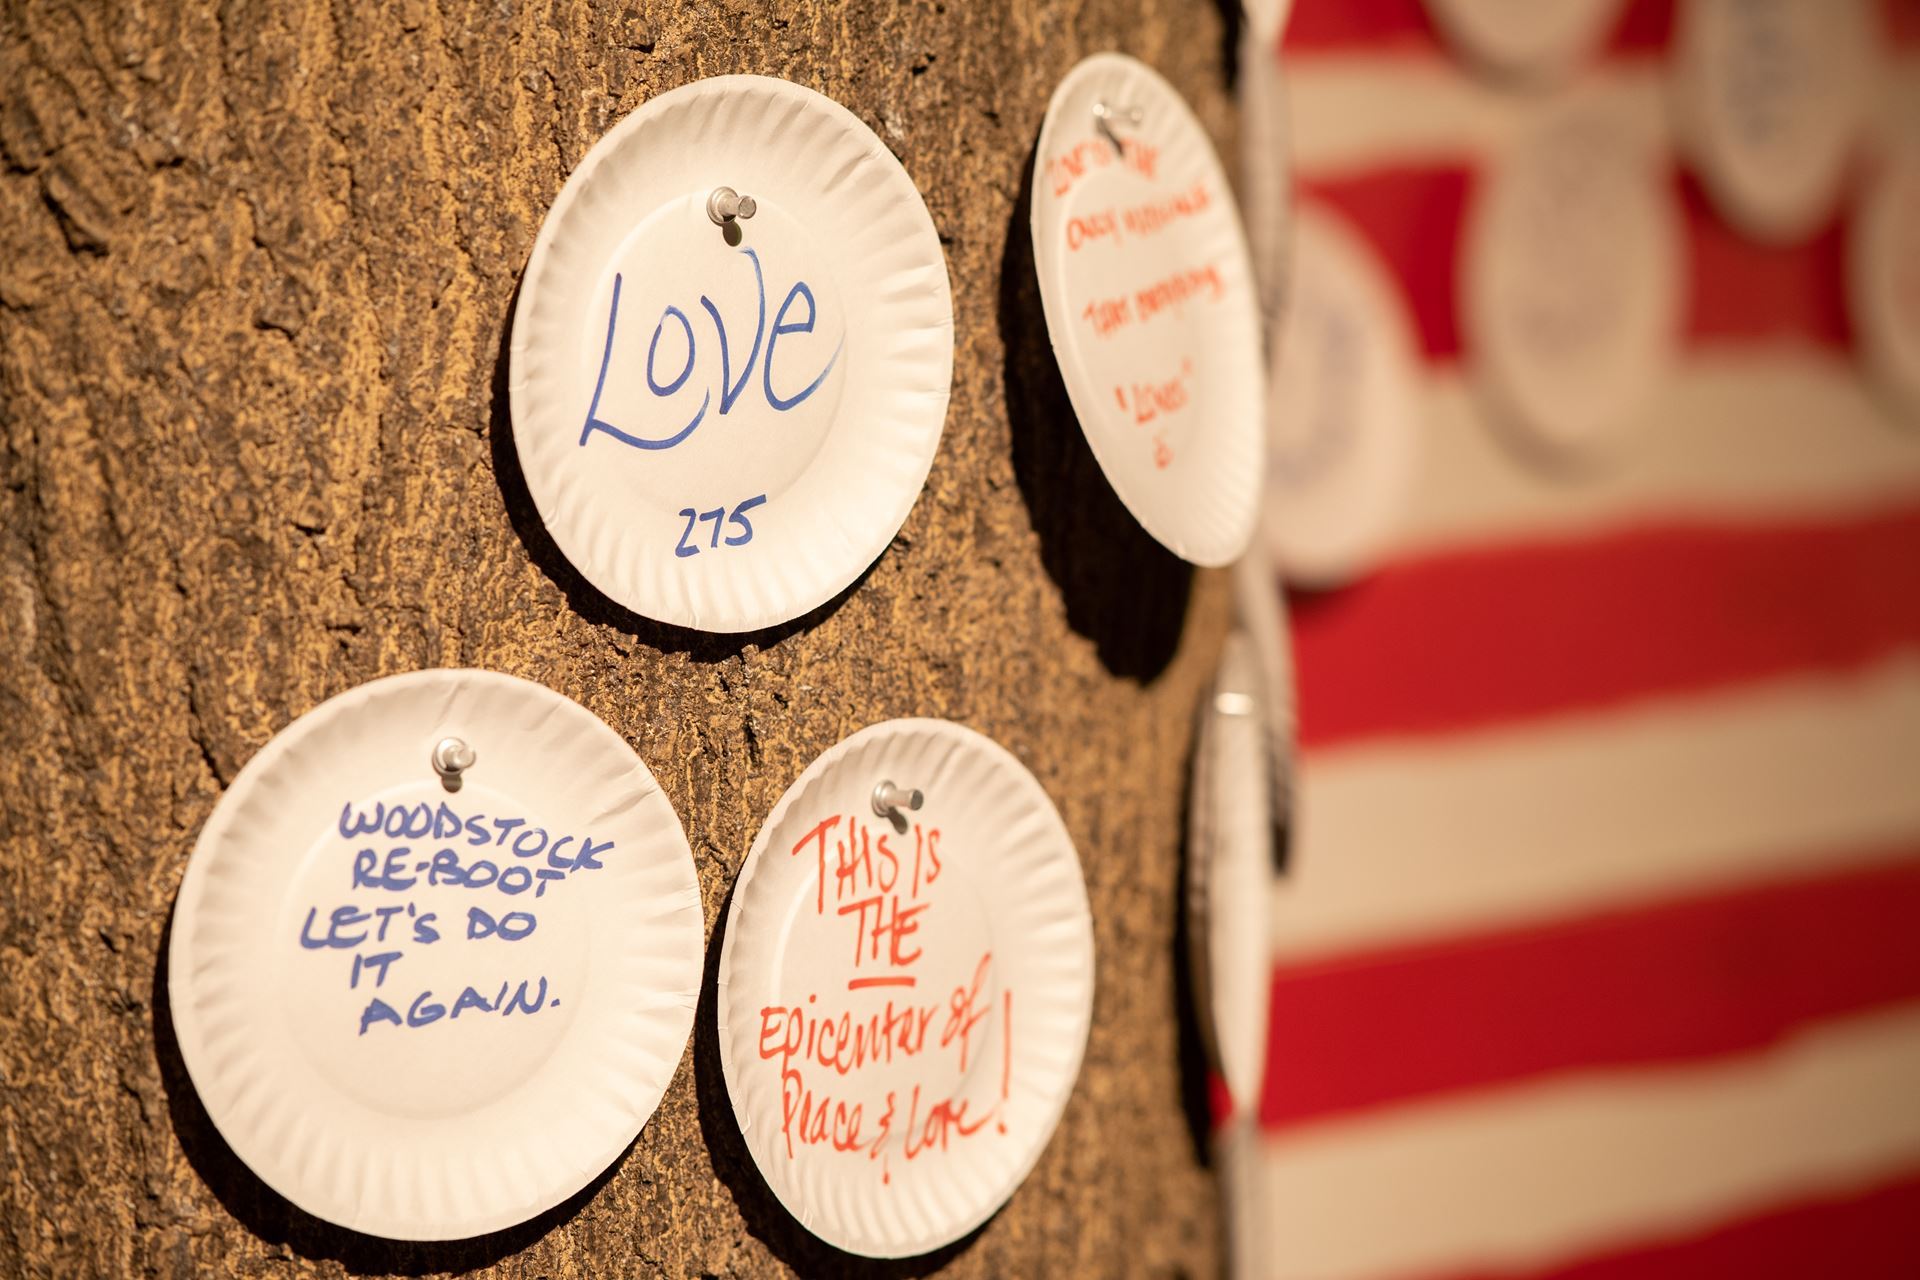 The replica of the Message Tree, designed to model the landmark tree on the field at Woodstock. The original, a red maple tree would serve as a meeting point and be covered in messages like asking people for rides, times to meet, etc. This replica Message Tree (pictured above) allows visitors to We Are Golden to leave their own thoughts about the exhibition and what they want to see in the world. Image courtesy The Museum at Bethel Woods.